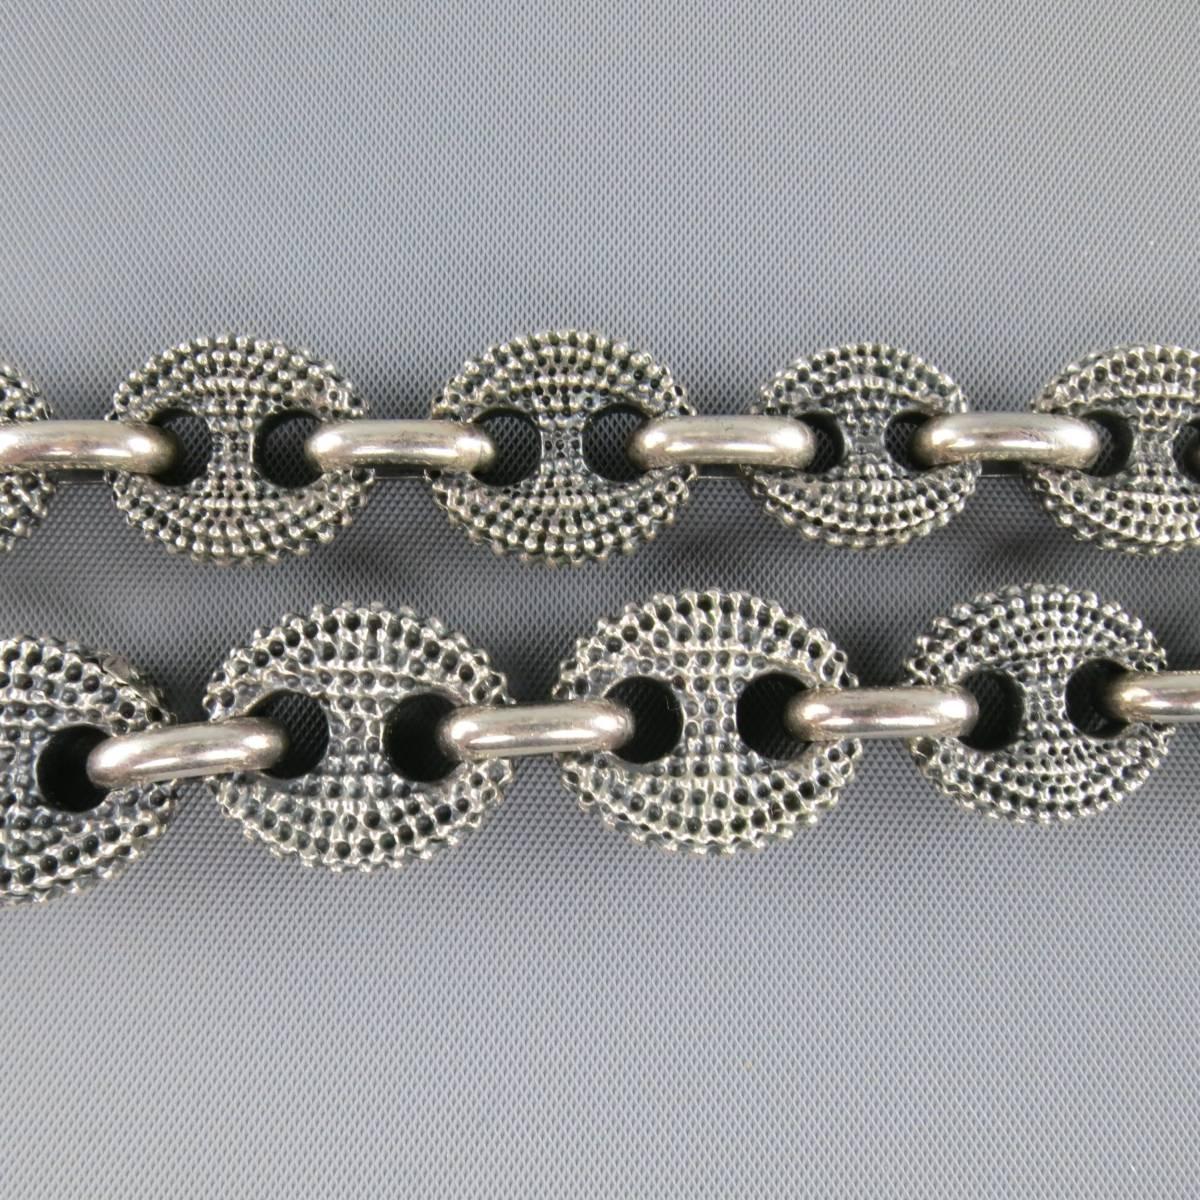 UGO CACCIATORI statement necklace features a sterling silver textured chain with cascading size links. Made in Italy.
 
Excellent Pre-Owned Condition.
 
Length: 20 in.
Width: 1.75 cm.


Web ID: 82047 